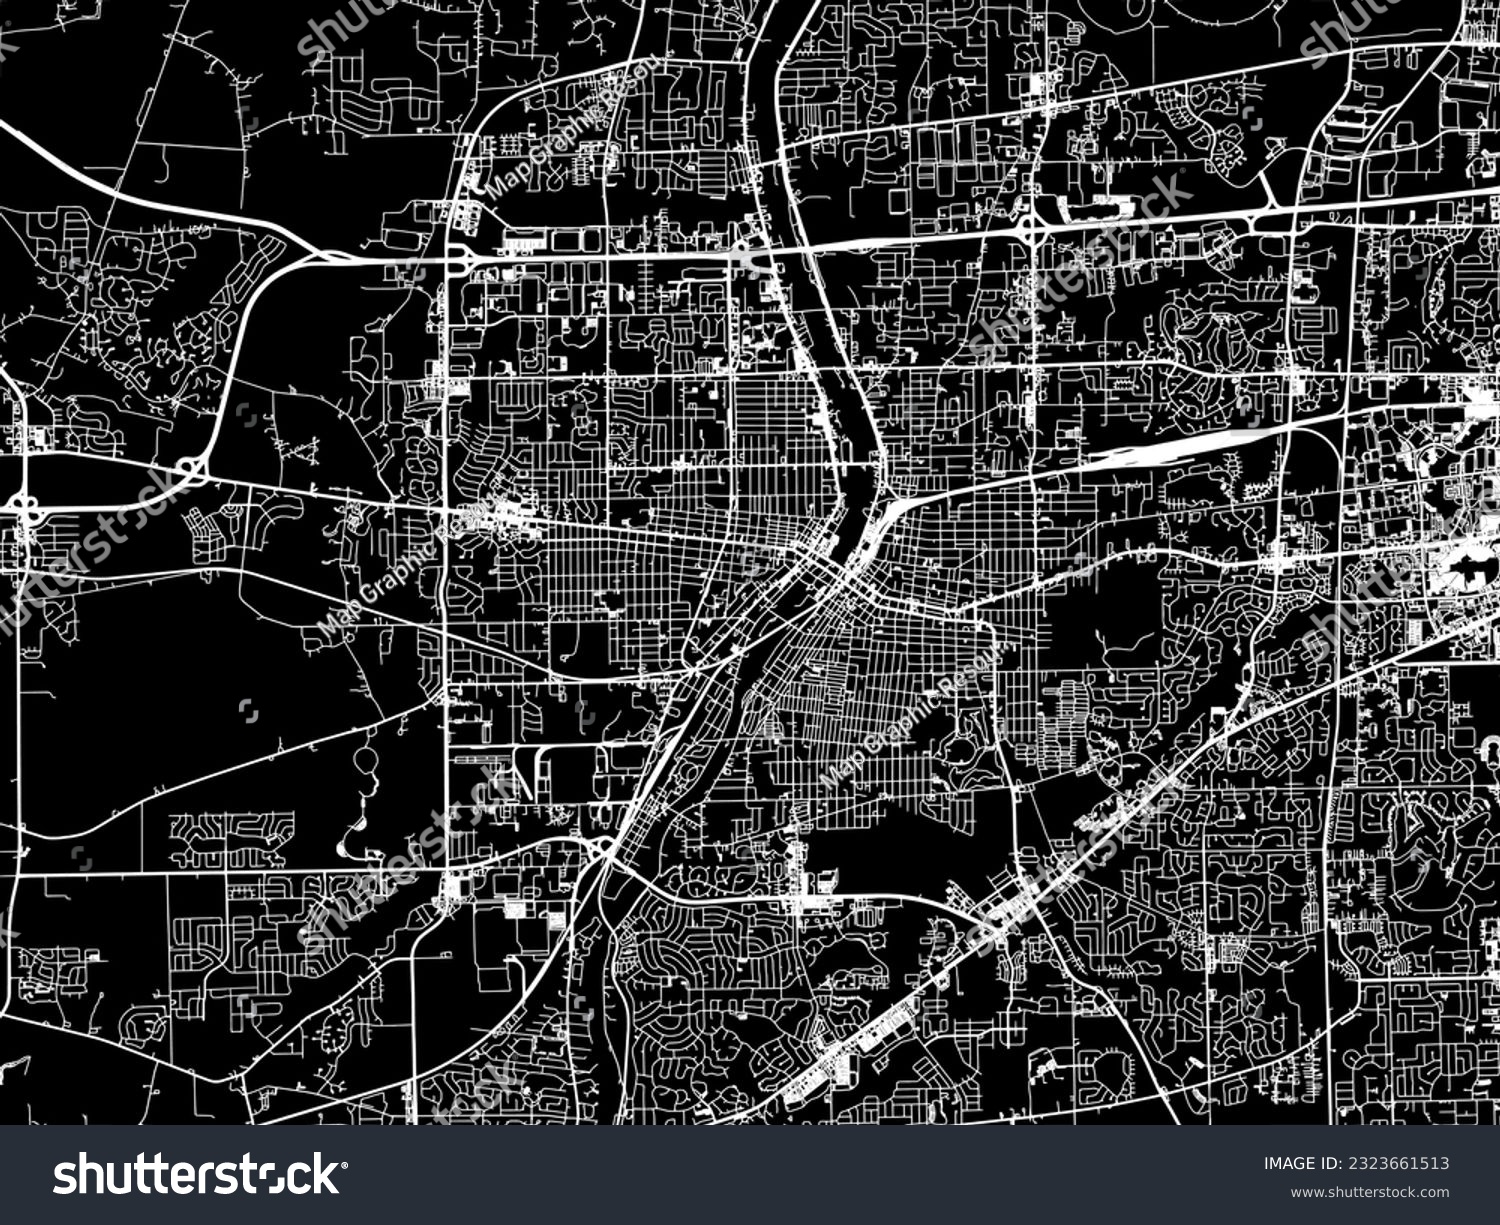 SVG of Vector city map of Aurora Illinois in the United States of America with white roads isolated on a black background. svg